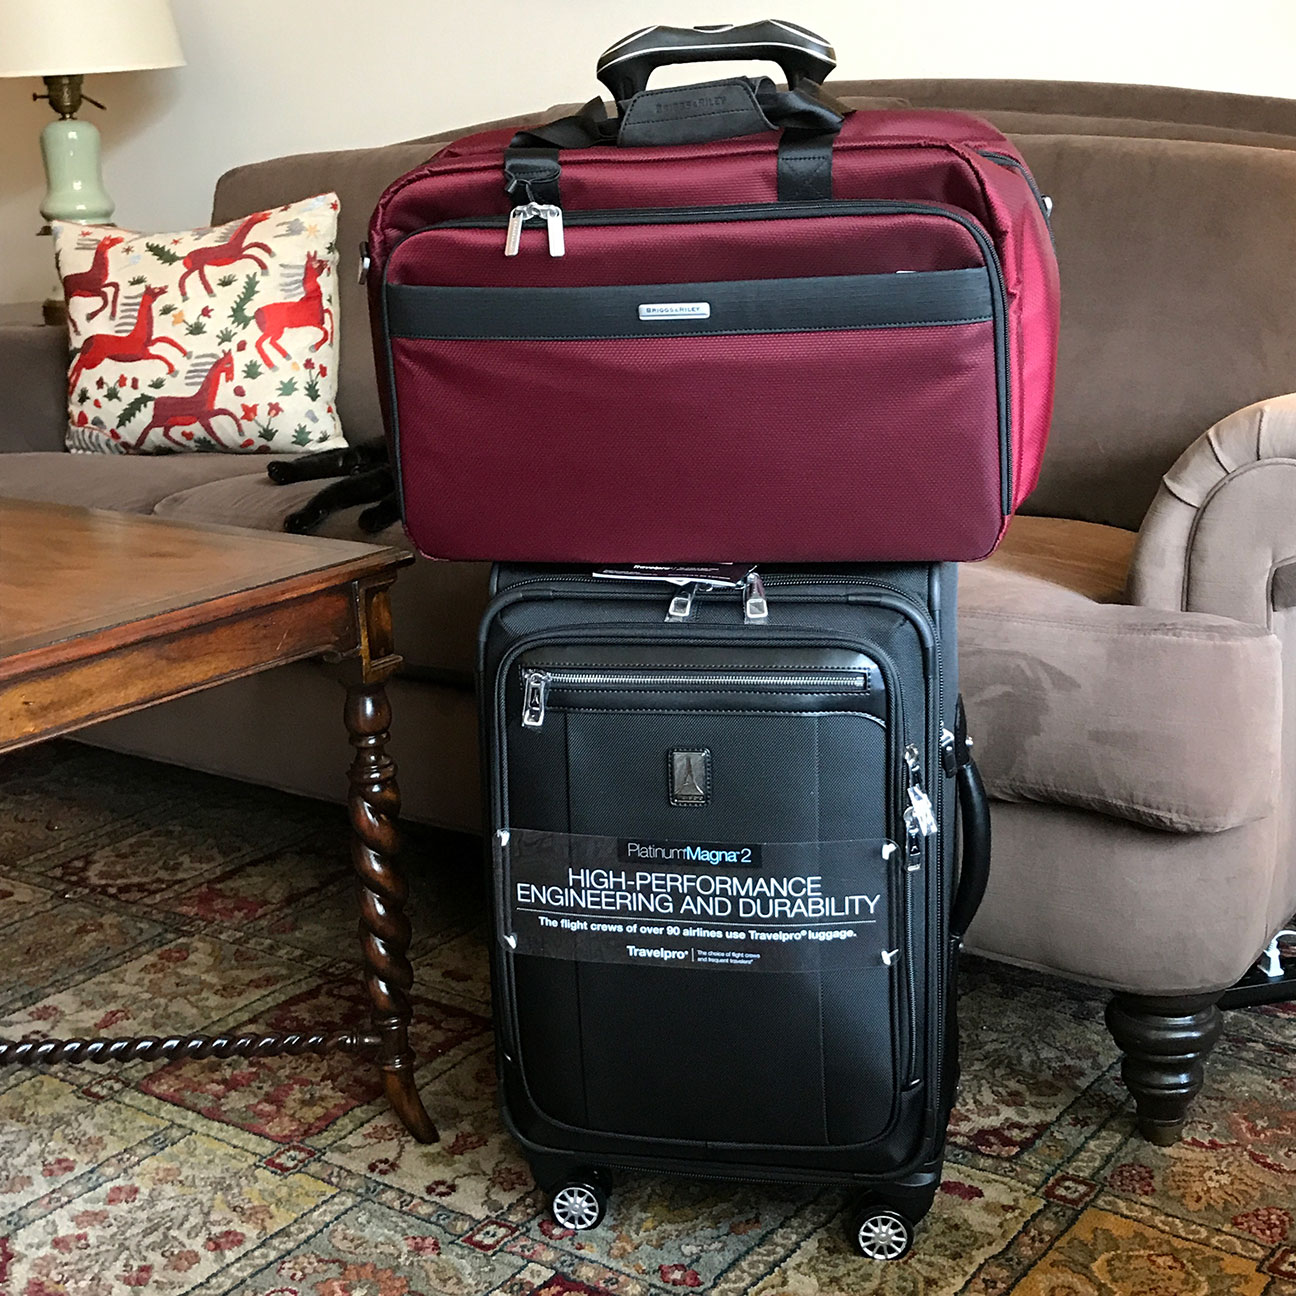 Picking the best bag for Europe travel. Spinner and tote.